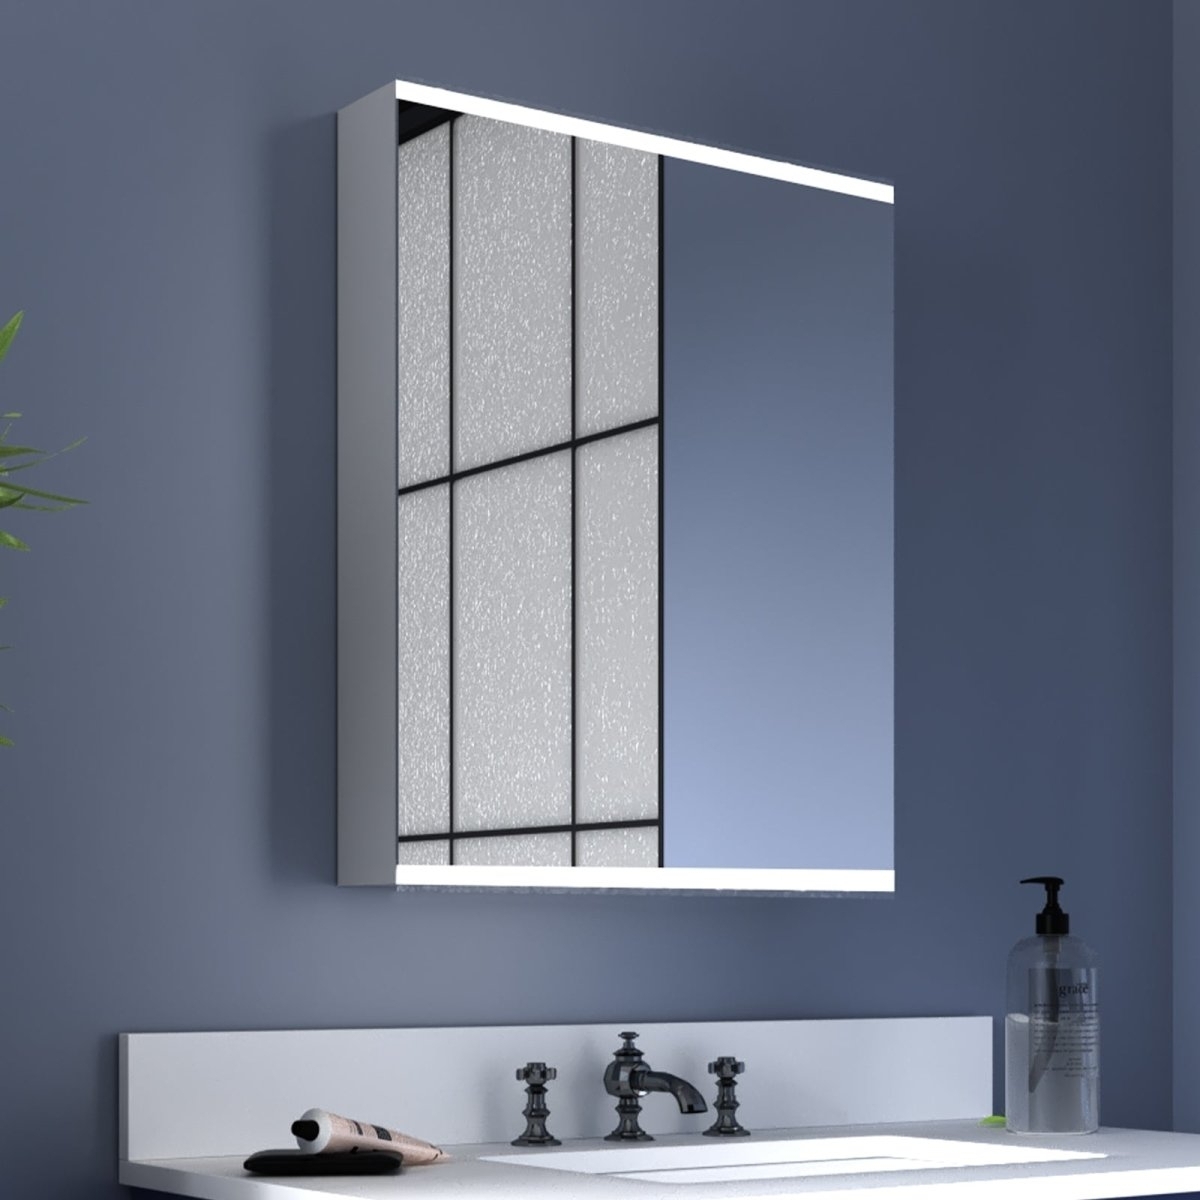 ExBrite 20 x 26 inch LED Bathroom Light Medicine Cabinet with Mirrors Left Side